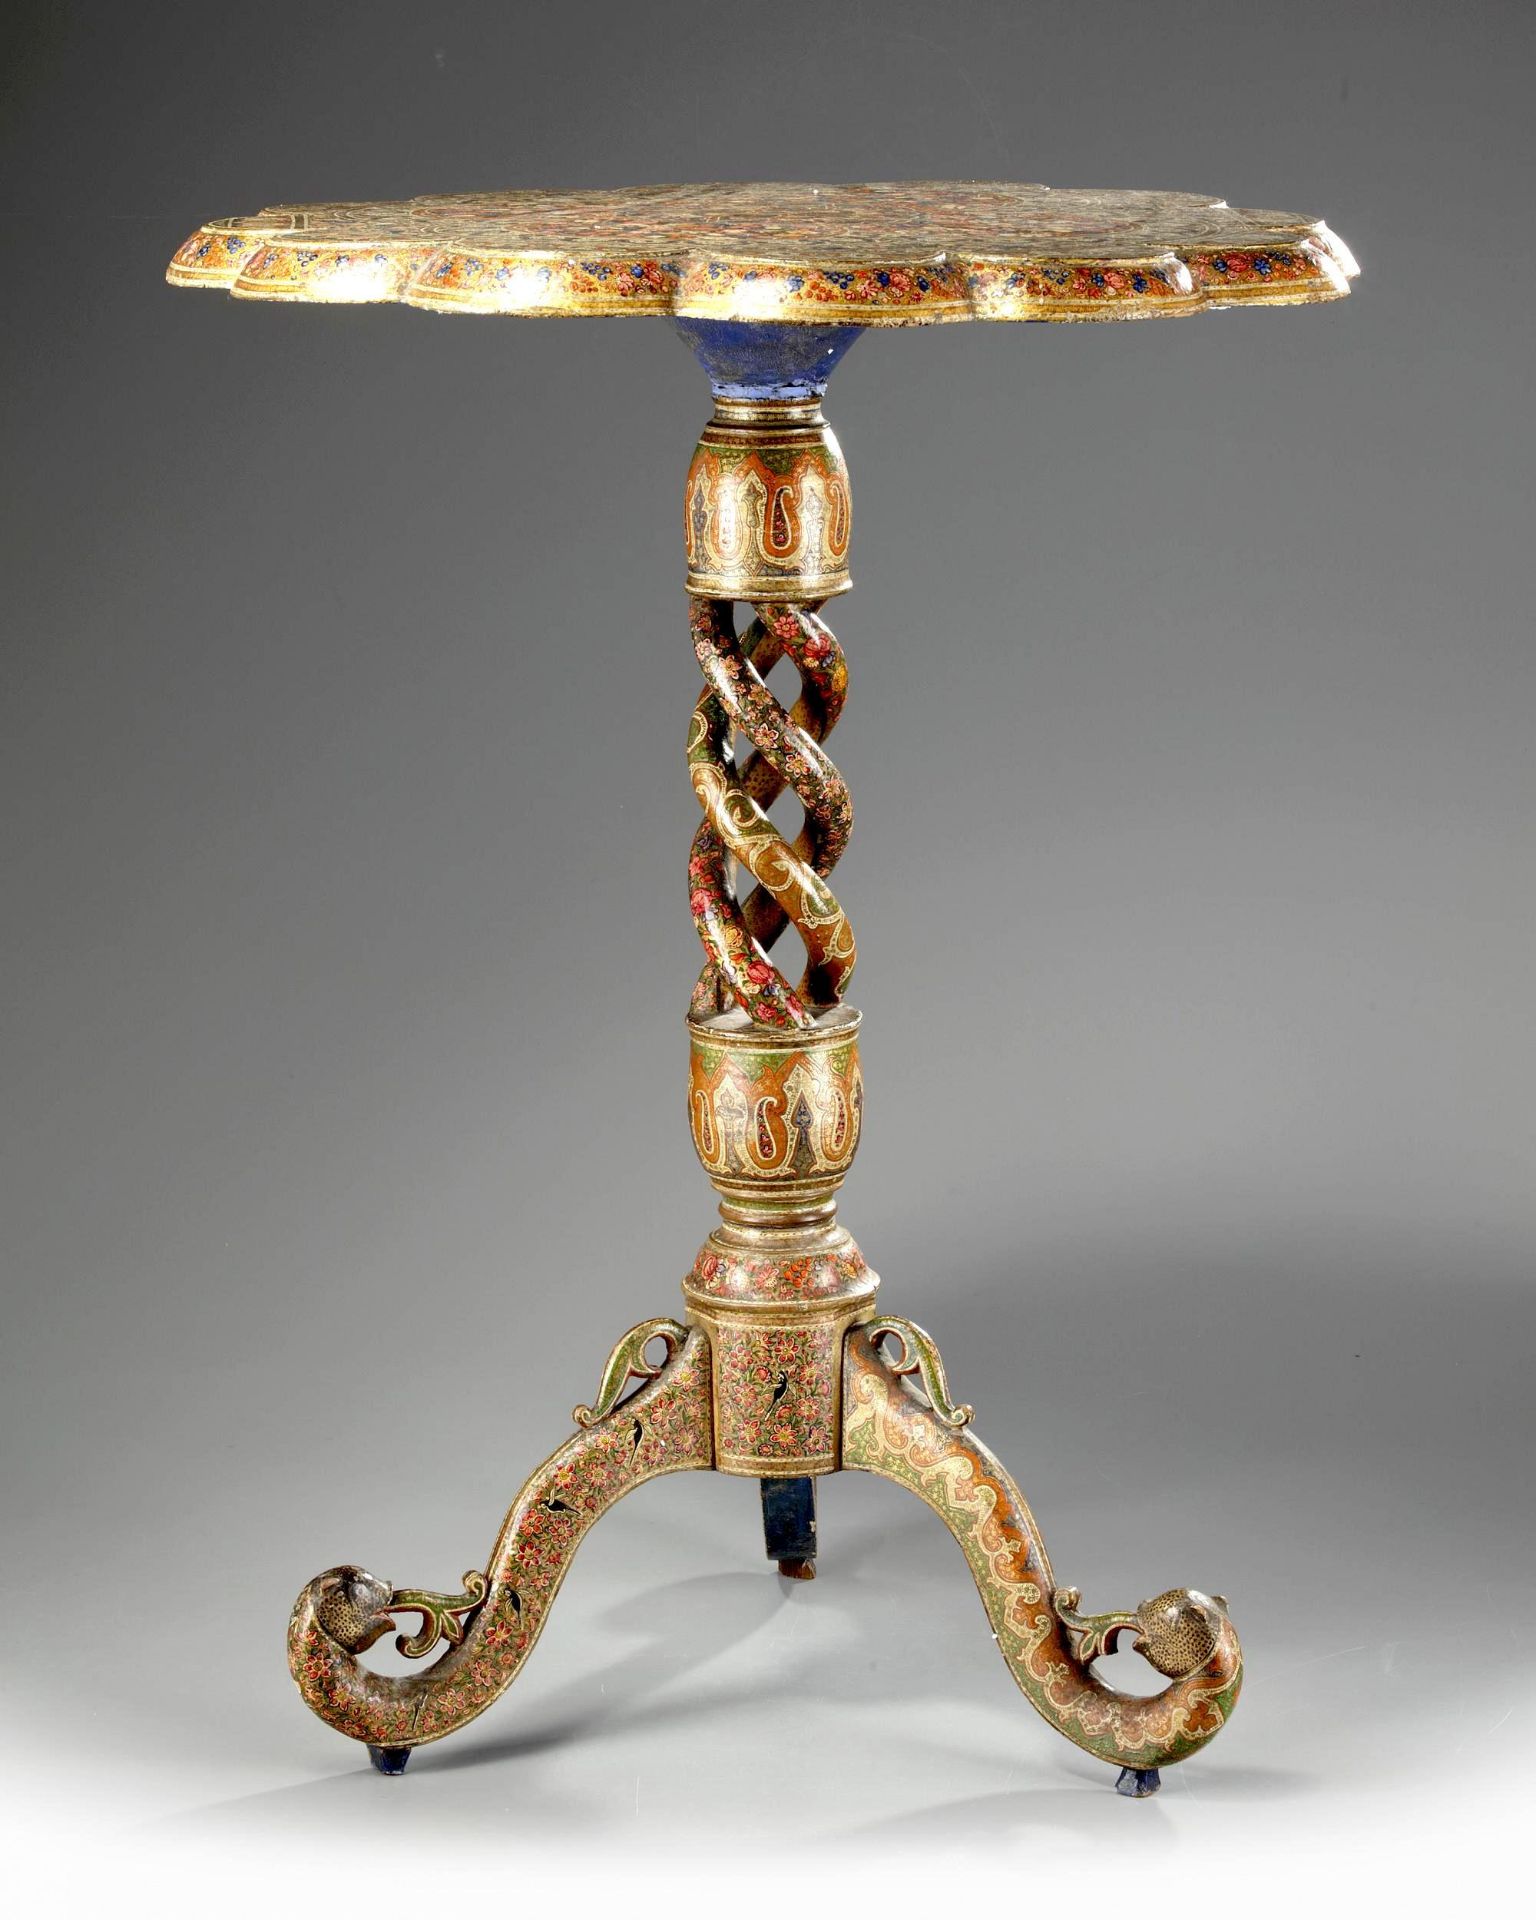 A KASHMIR LACQUERED WOOD TABLE, KASHMIR, 19TH CENTURY - Image 3 of 3